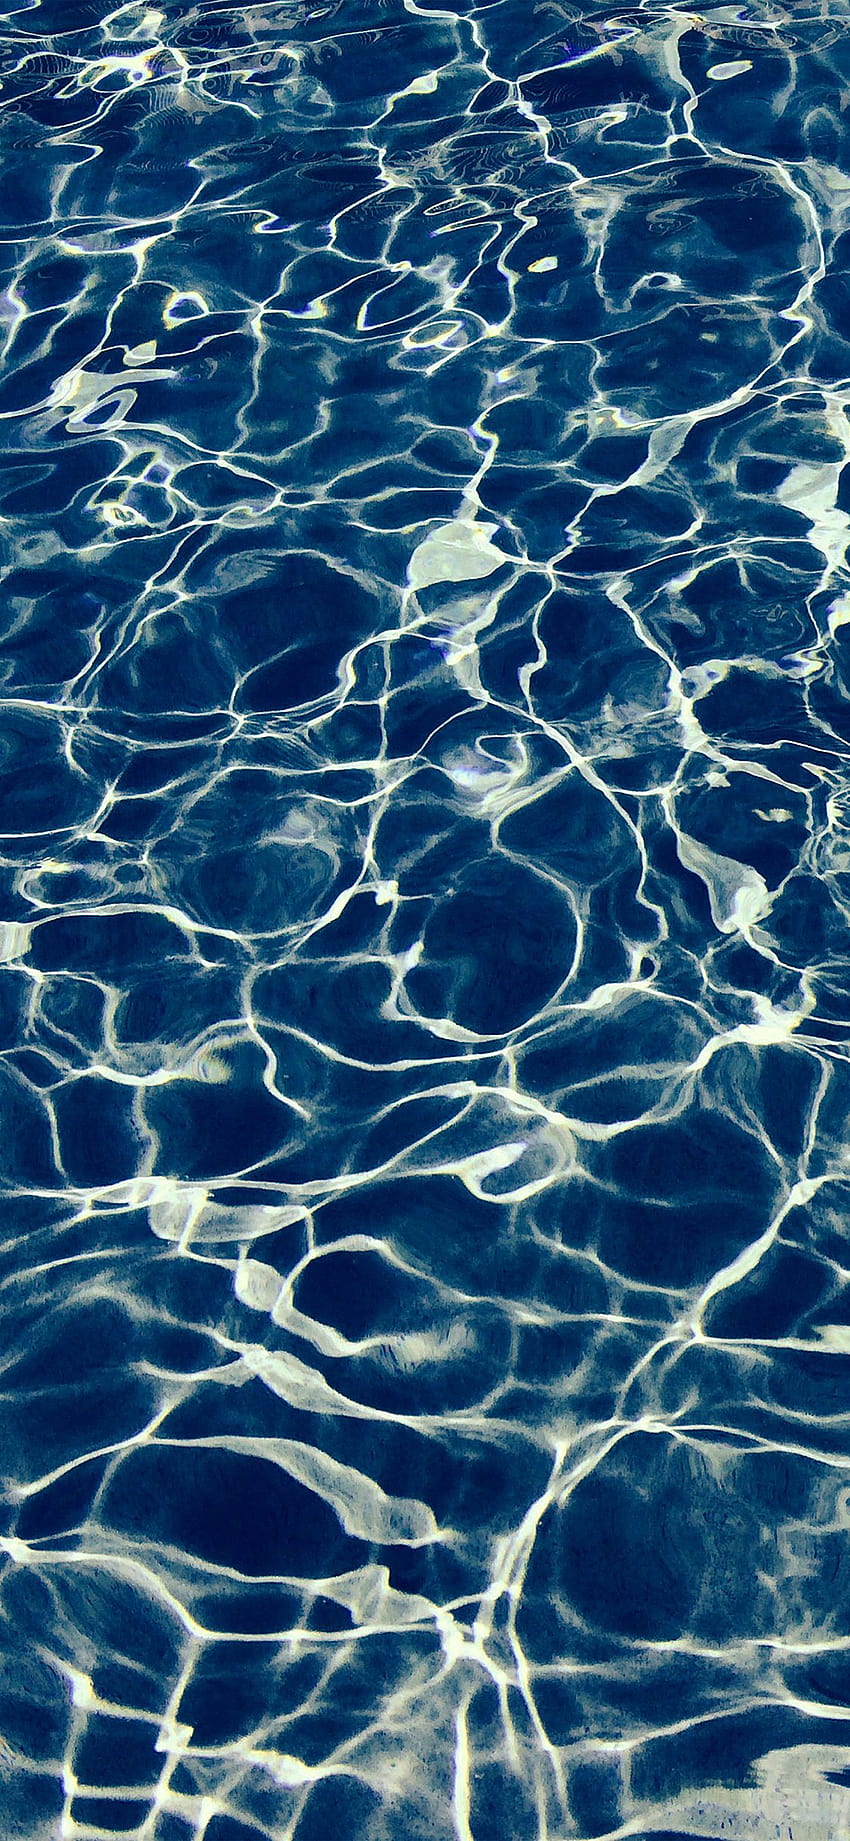 Water for iPhone, iPad, and, water effect HD phone wallpaper